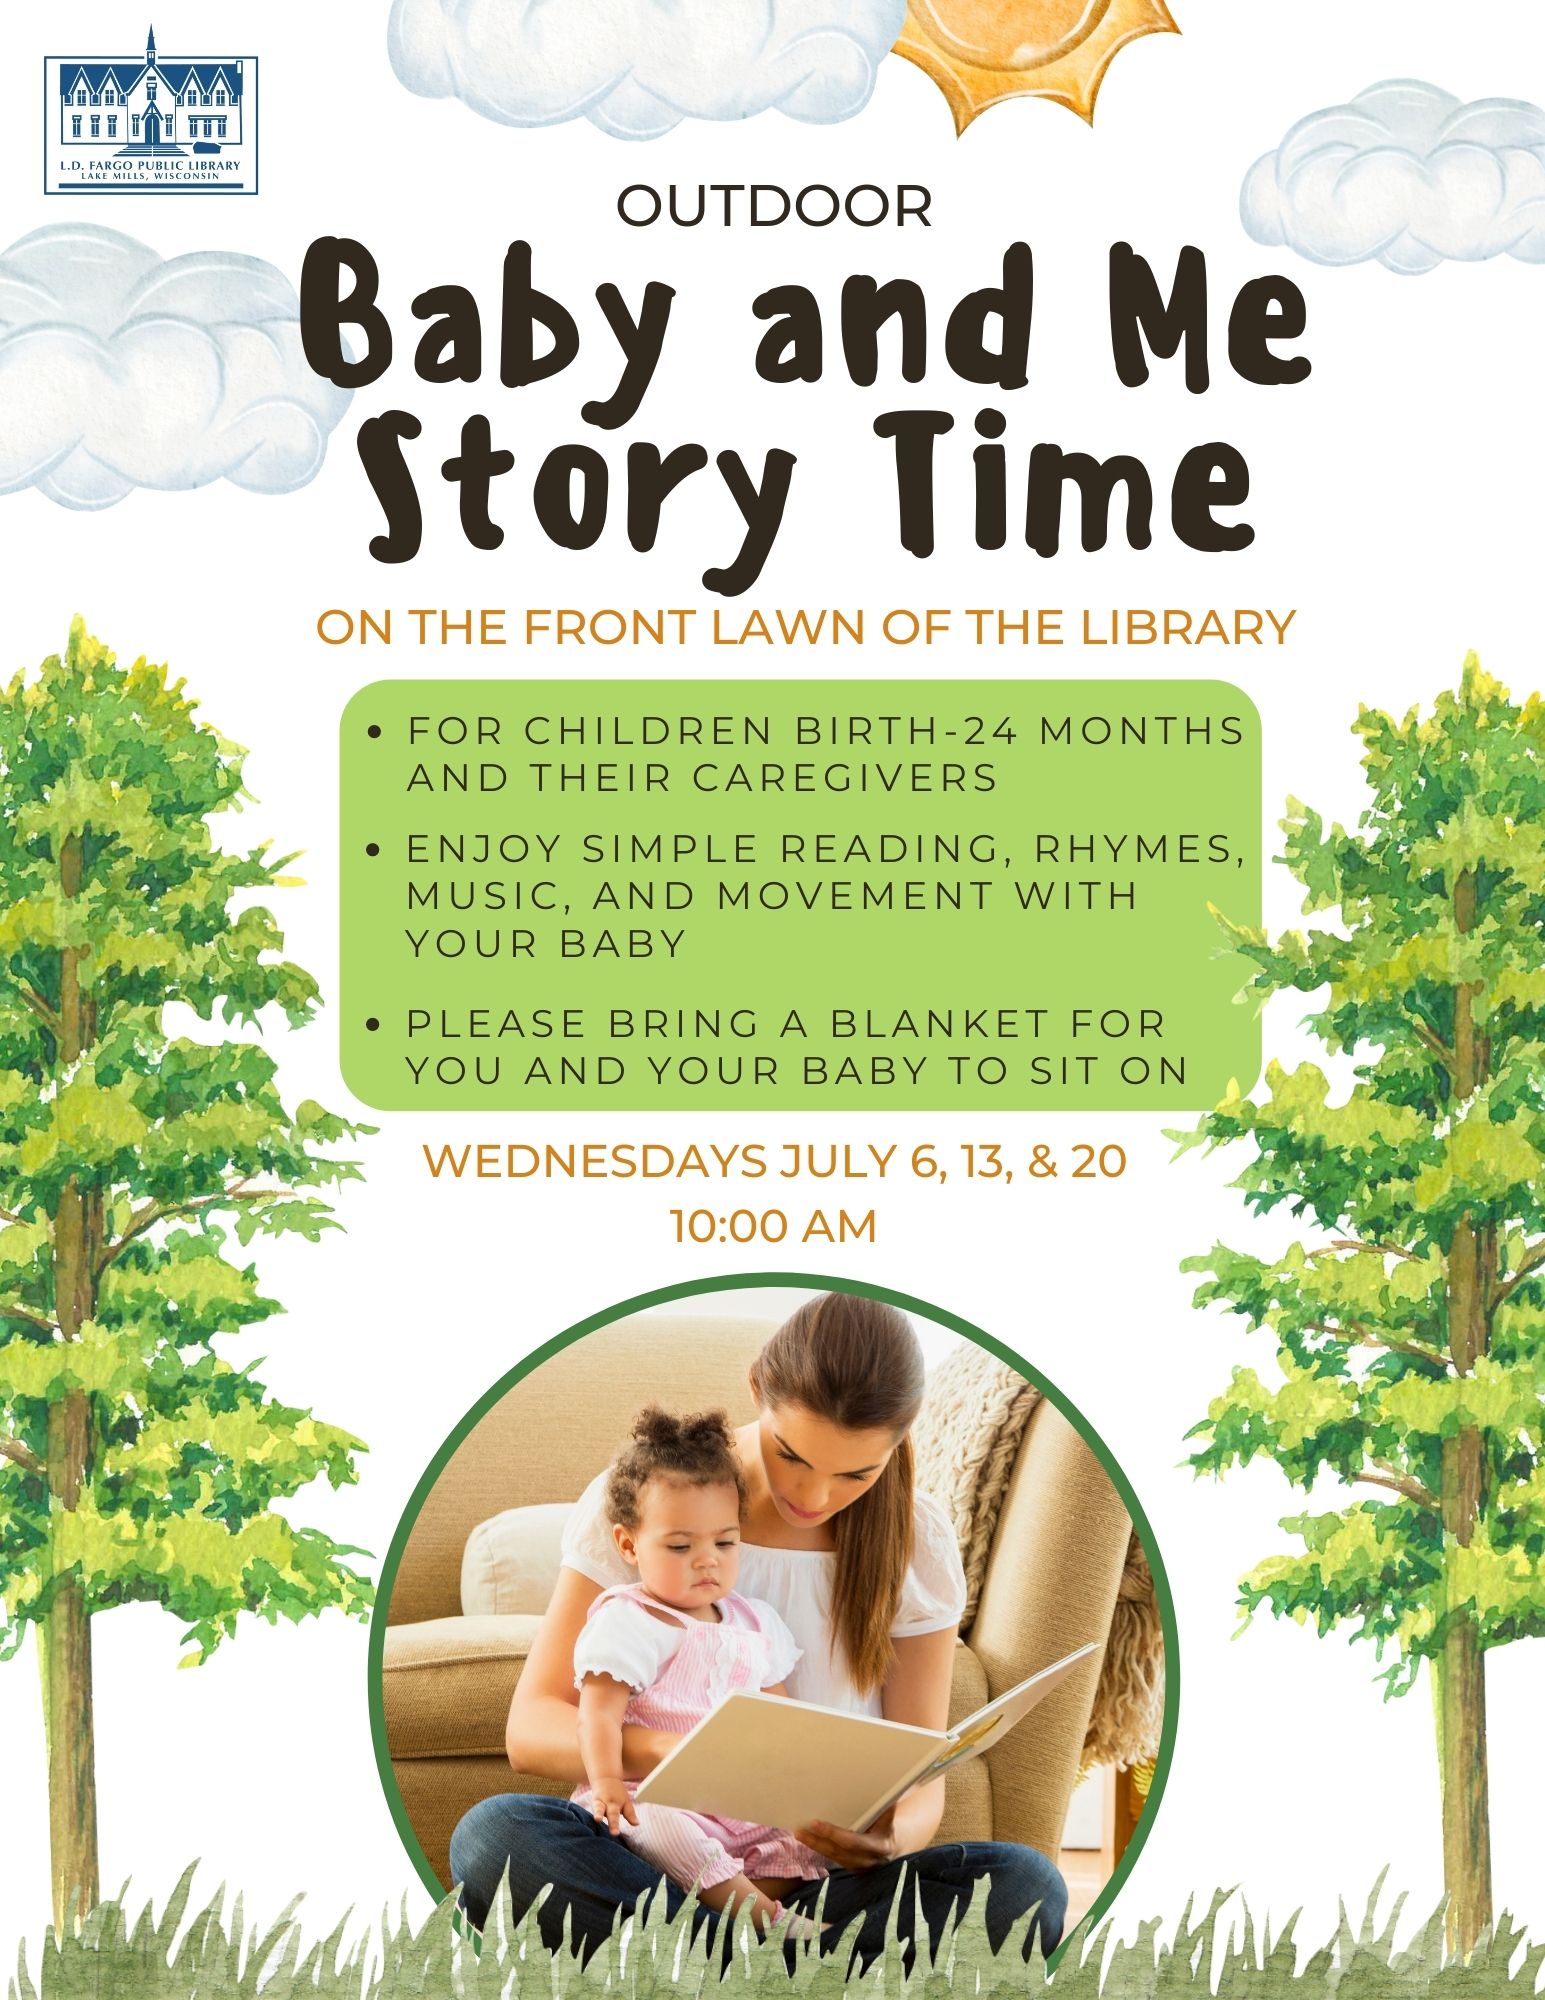 Outdoor Baby and Me Story Time.  Wednesdays July 6, 13, & 20.  